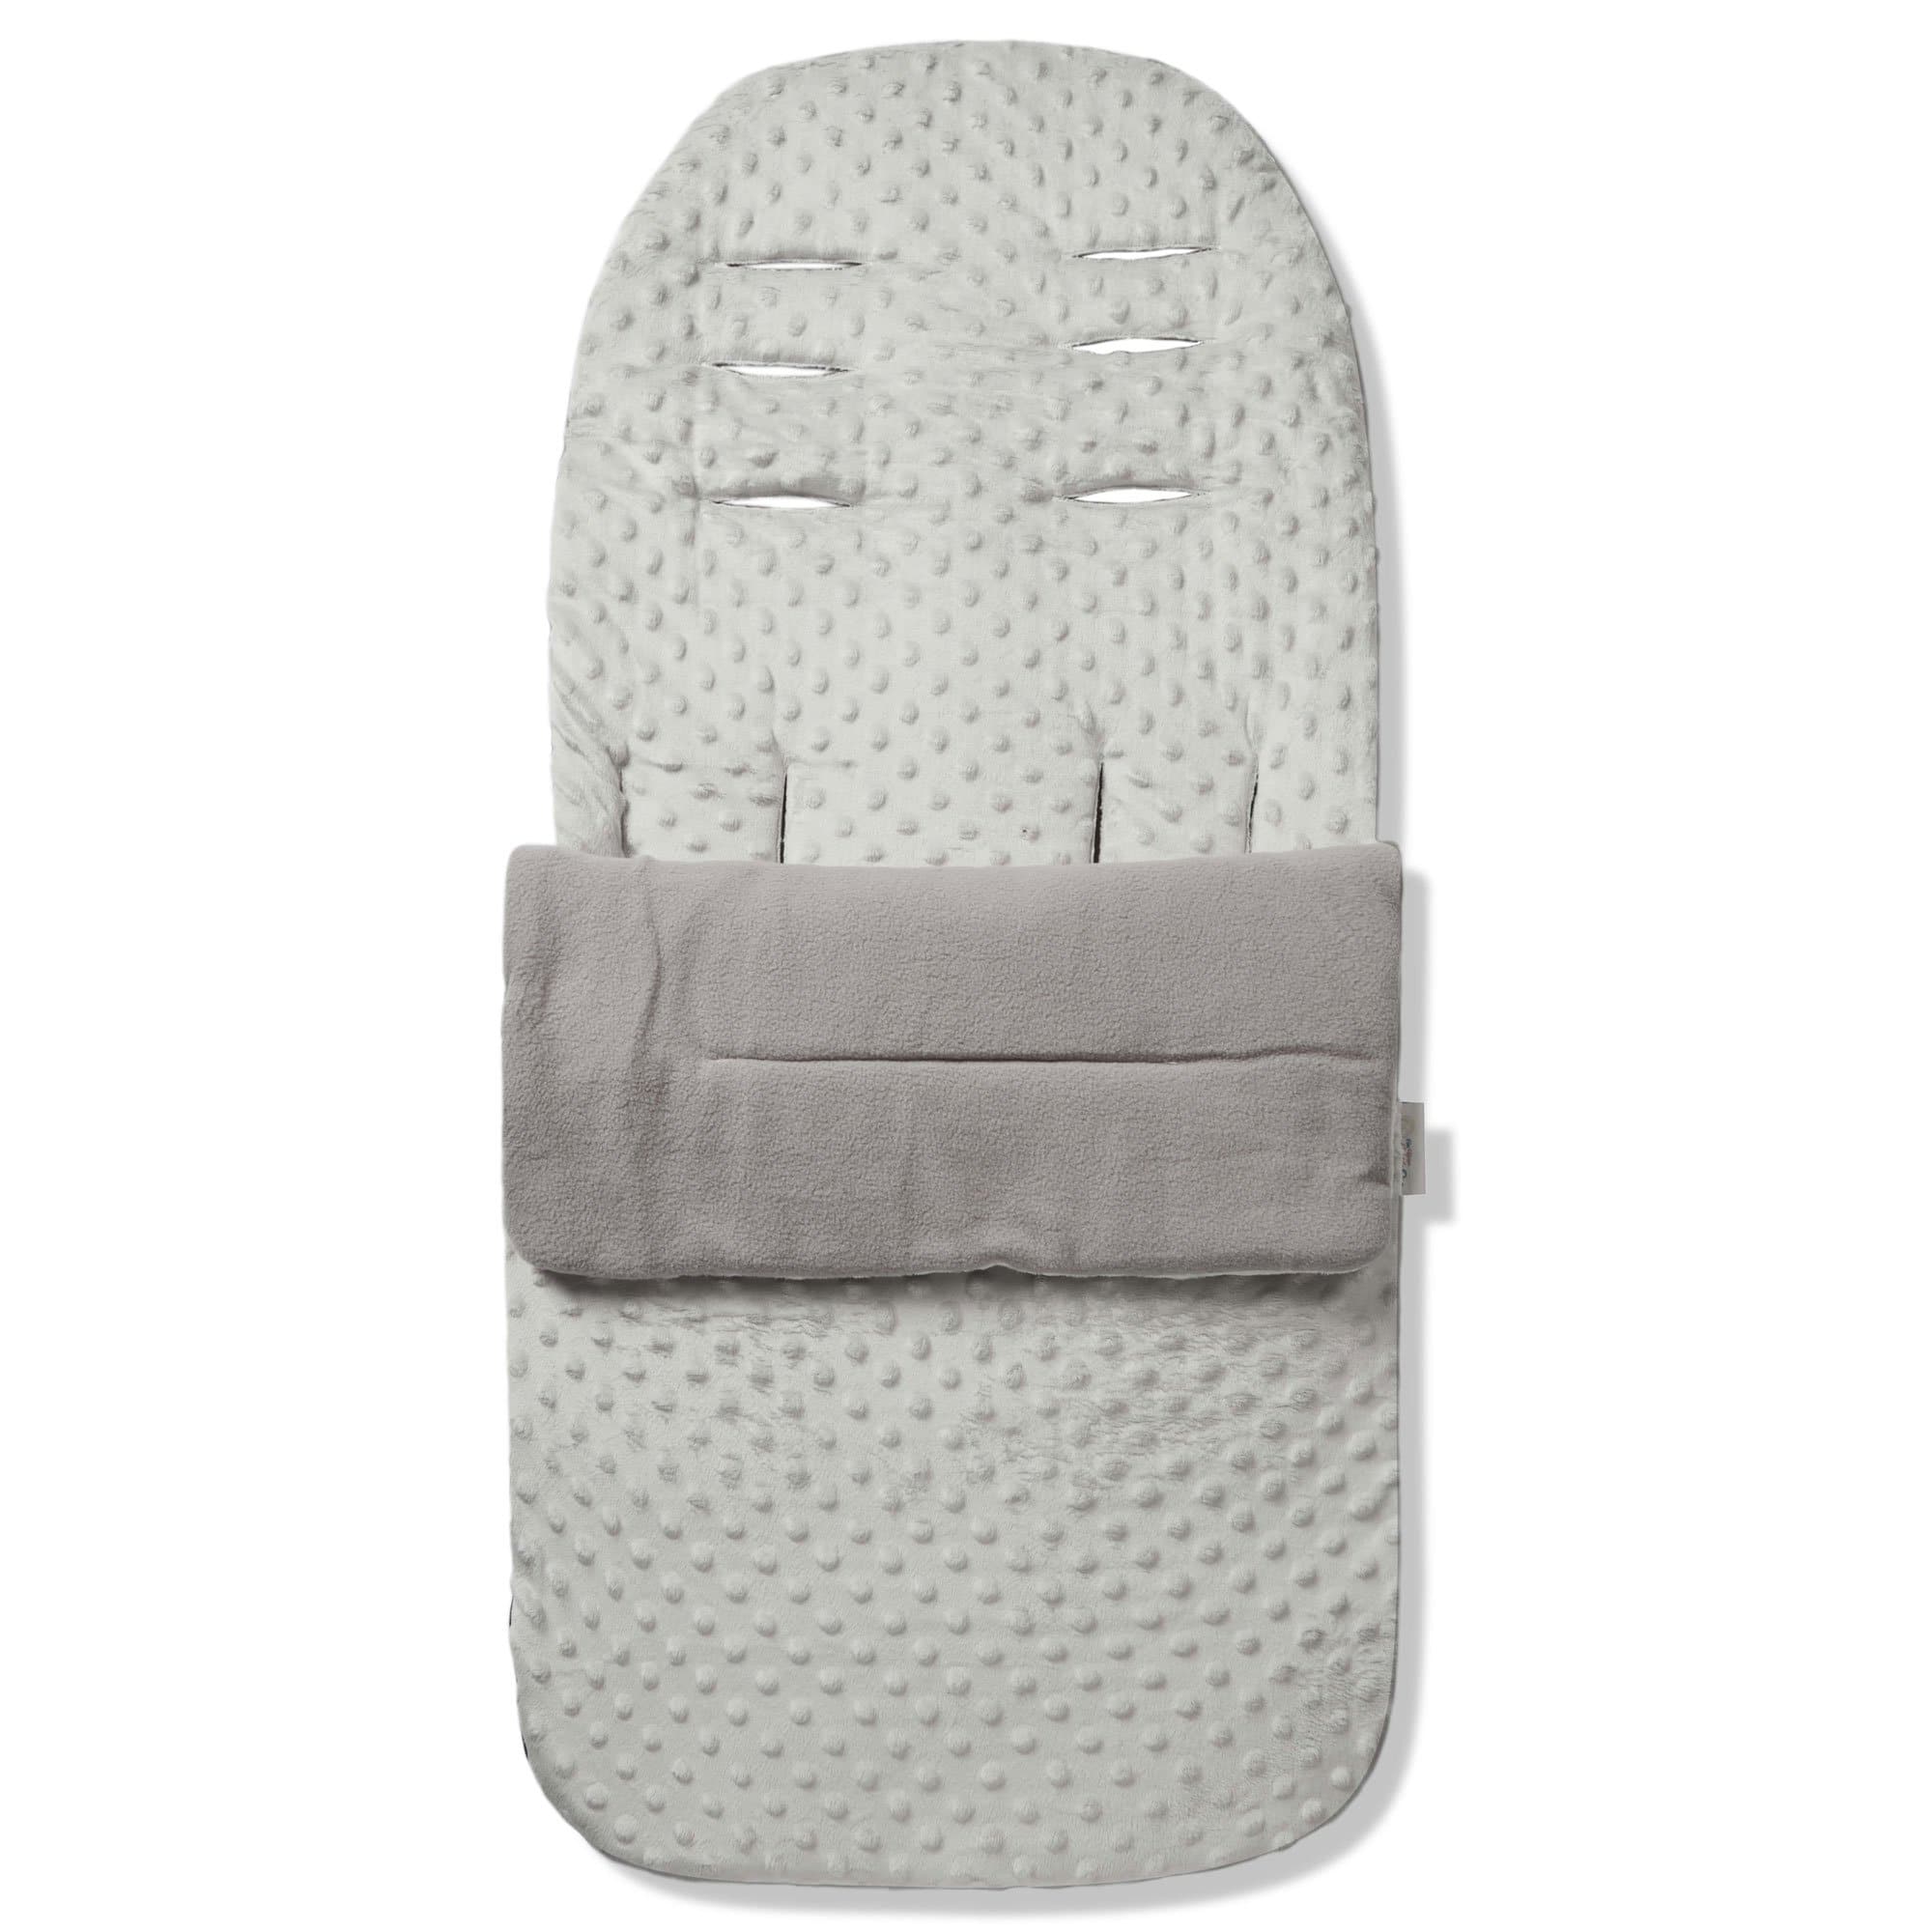 Dimple Footmuff / Cosy Toes Compatible with Greentom - Grey / Fits All Models | For Your Little One